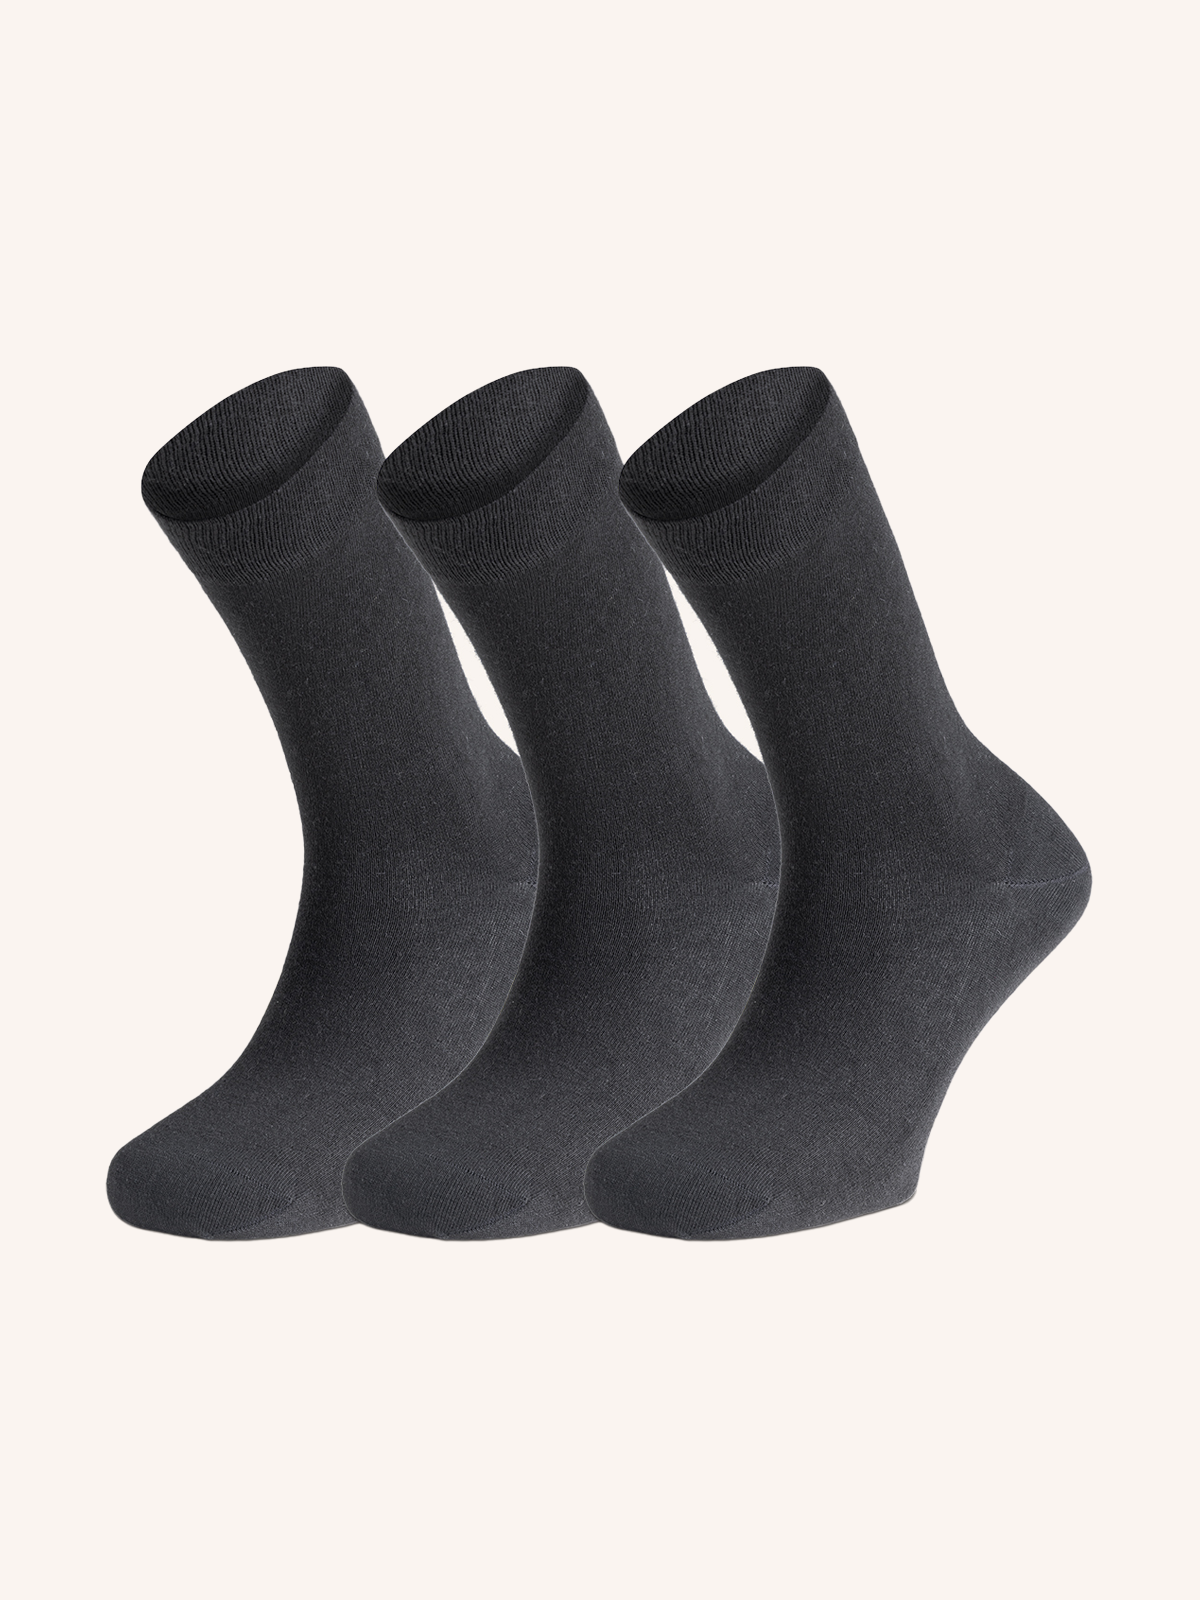 Short Sock in Organic Cotton for Men | Plain Color | Pack of 3 Pairs | Bio Cotton UC